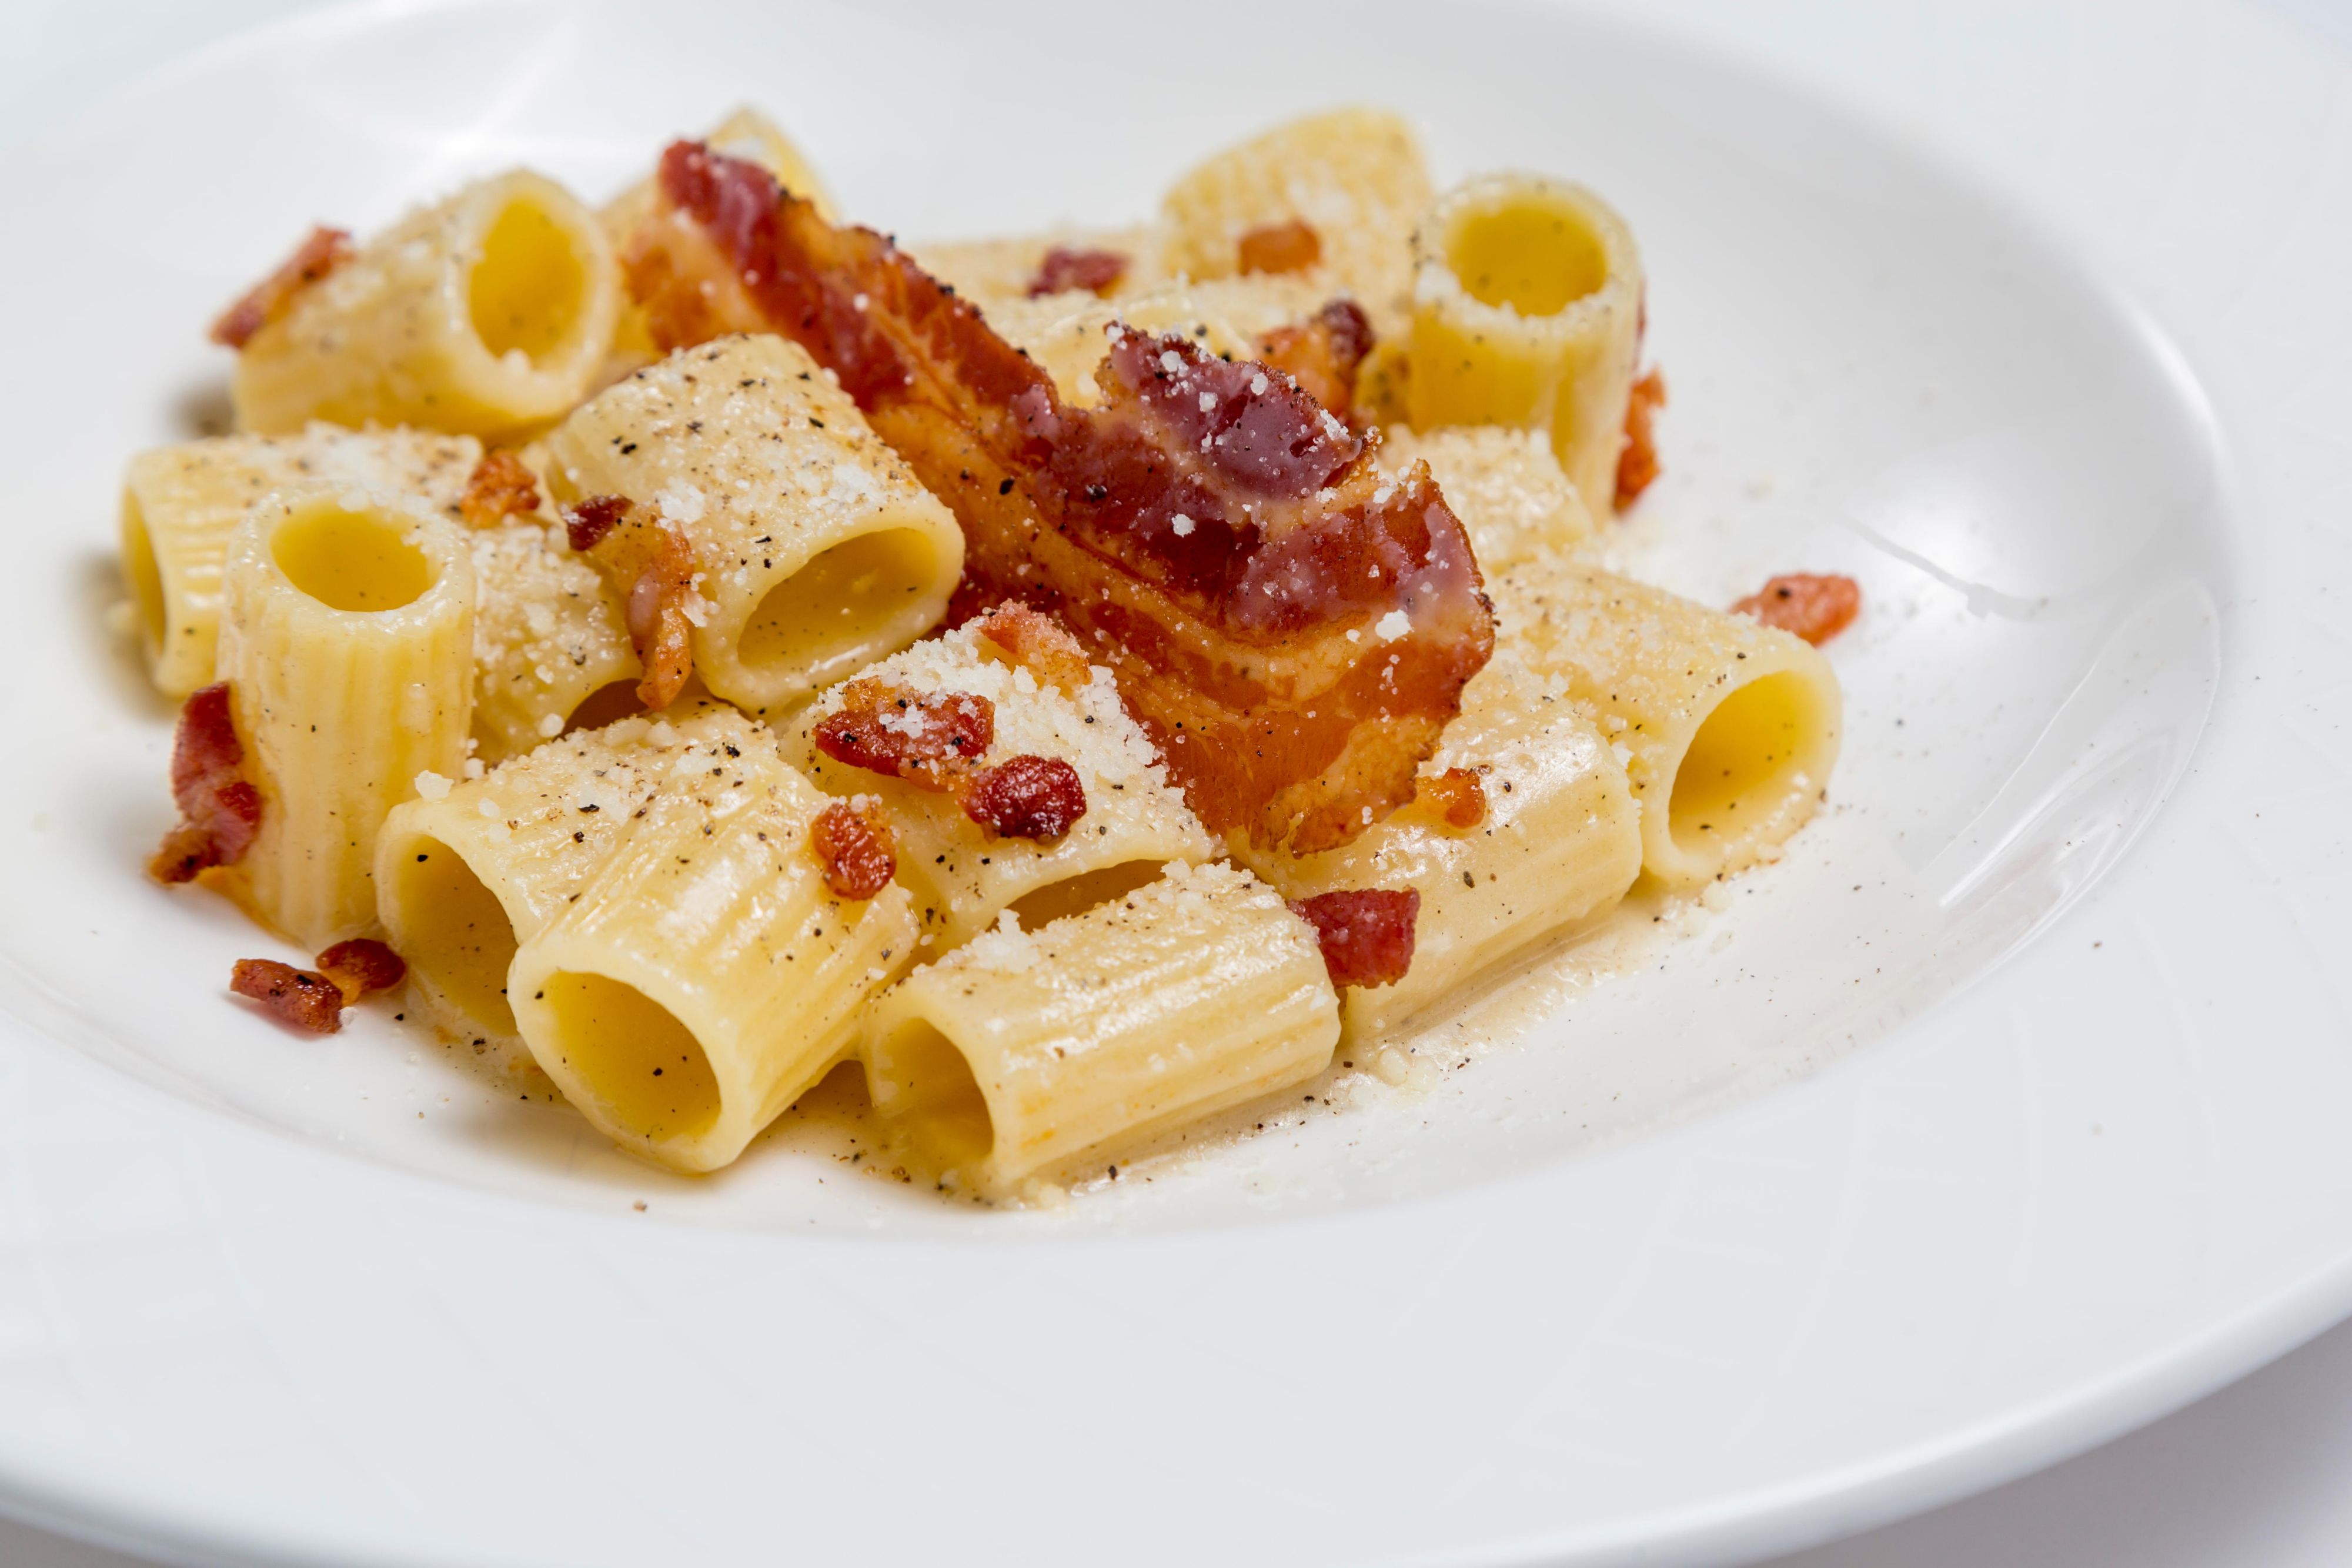 Gricia: Short pasta with bacon